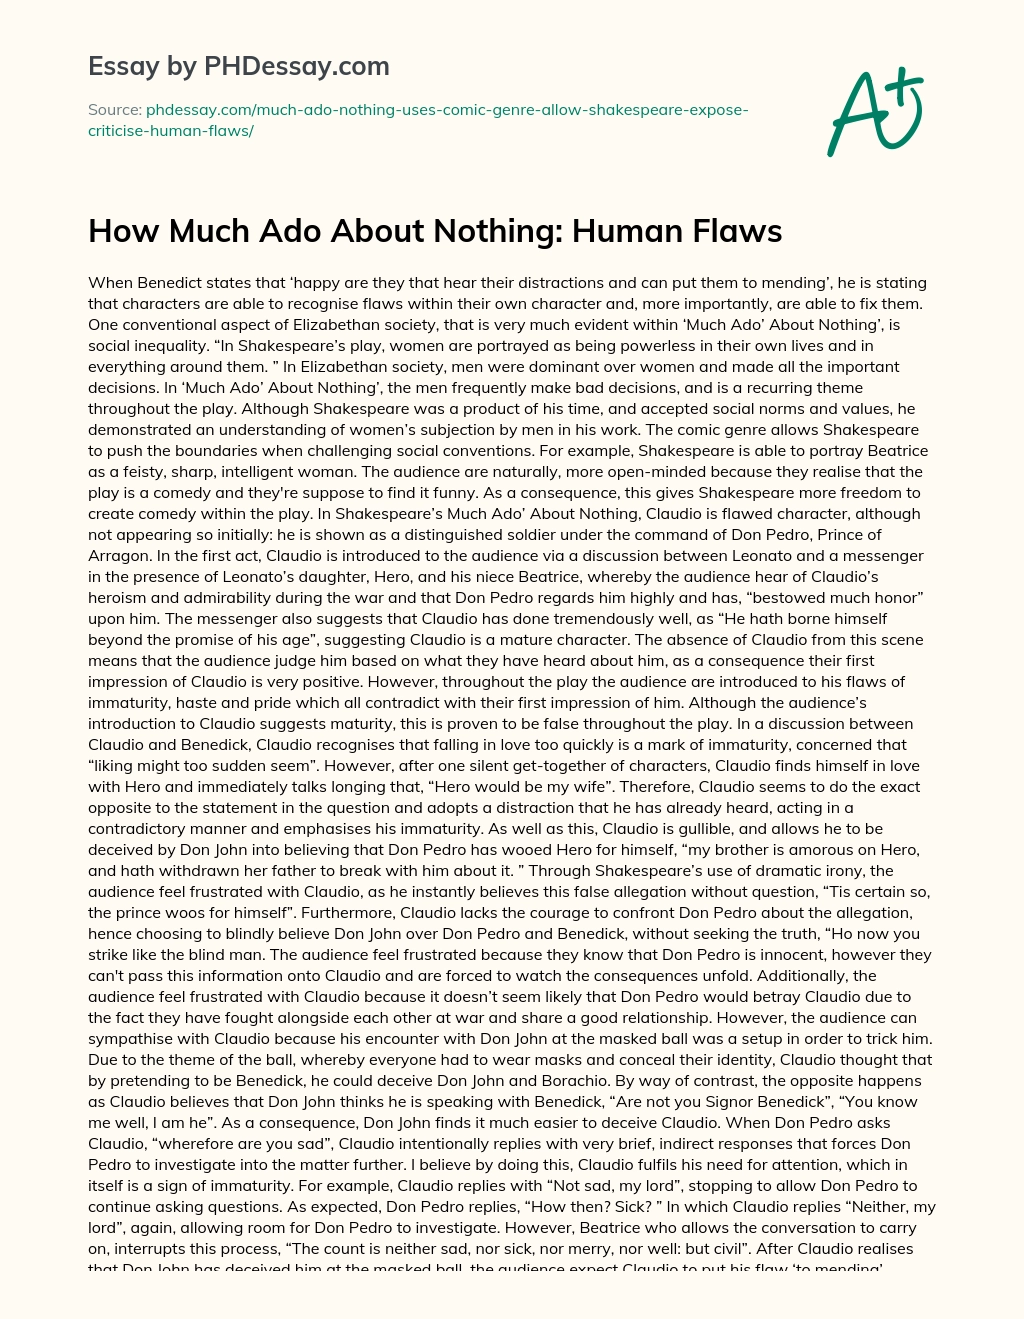 How Much Ado About Nothing: Human Flaws essay